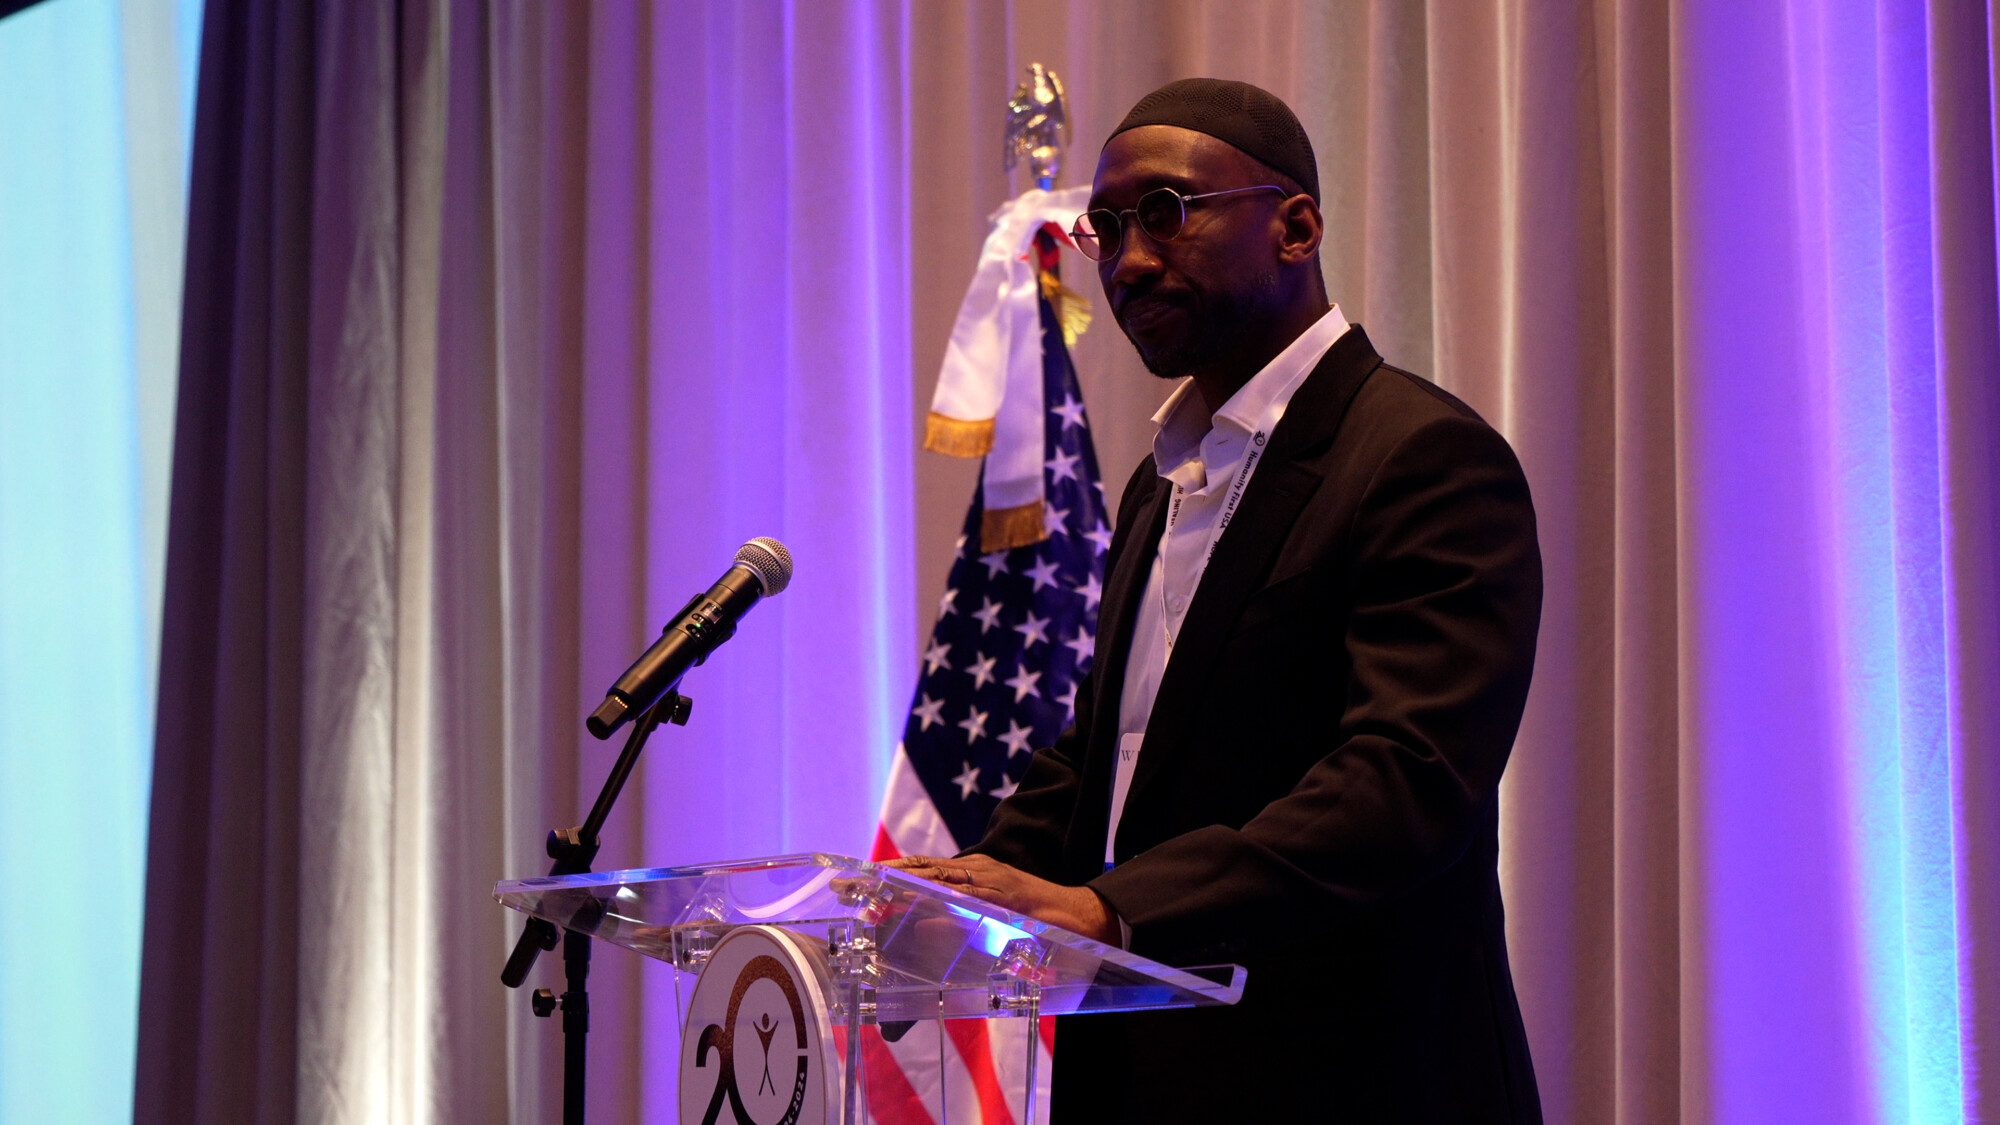 Mr. Mahershala Ali speaking from a podium with an American flag behind him